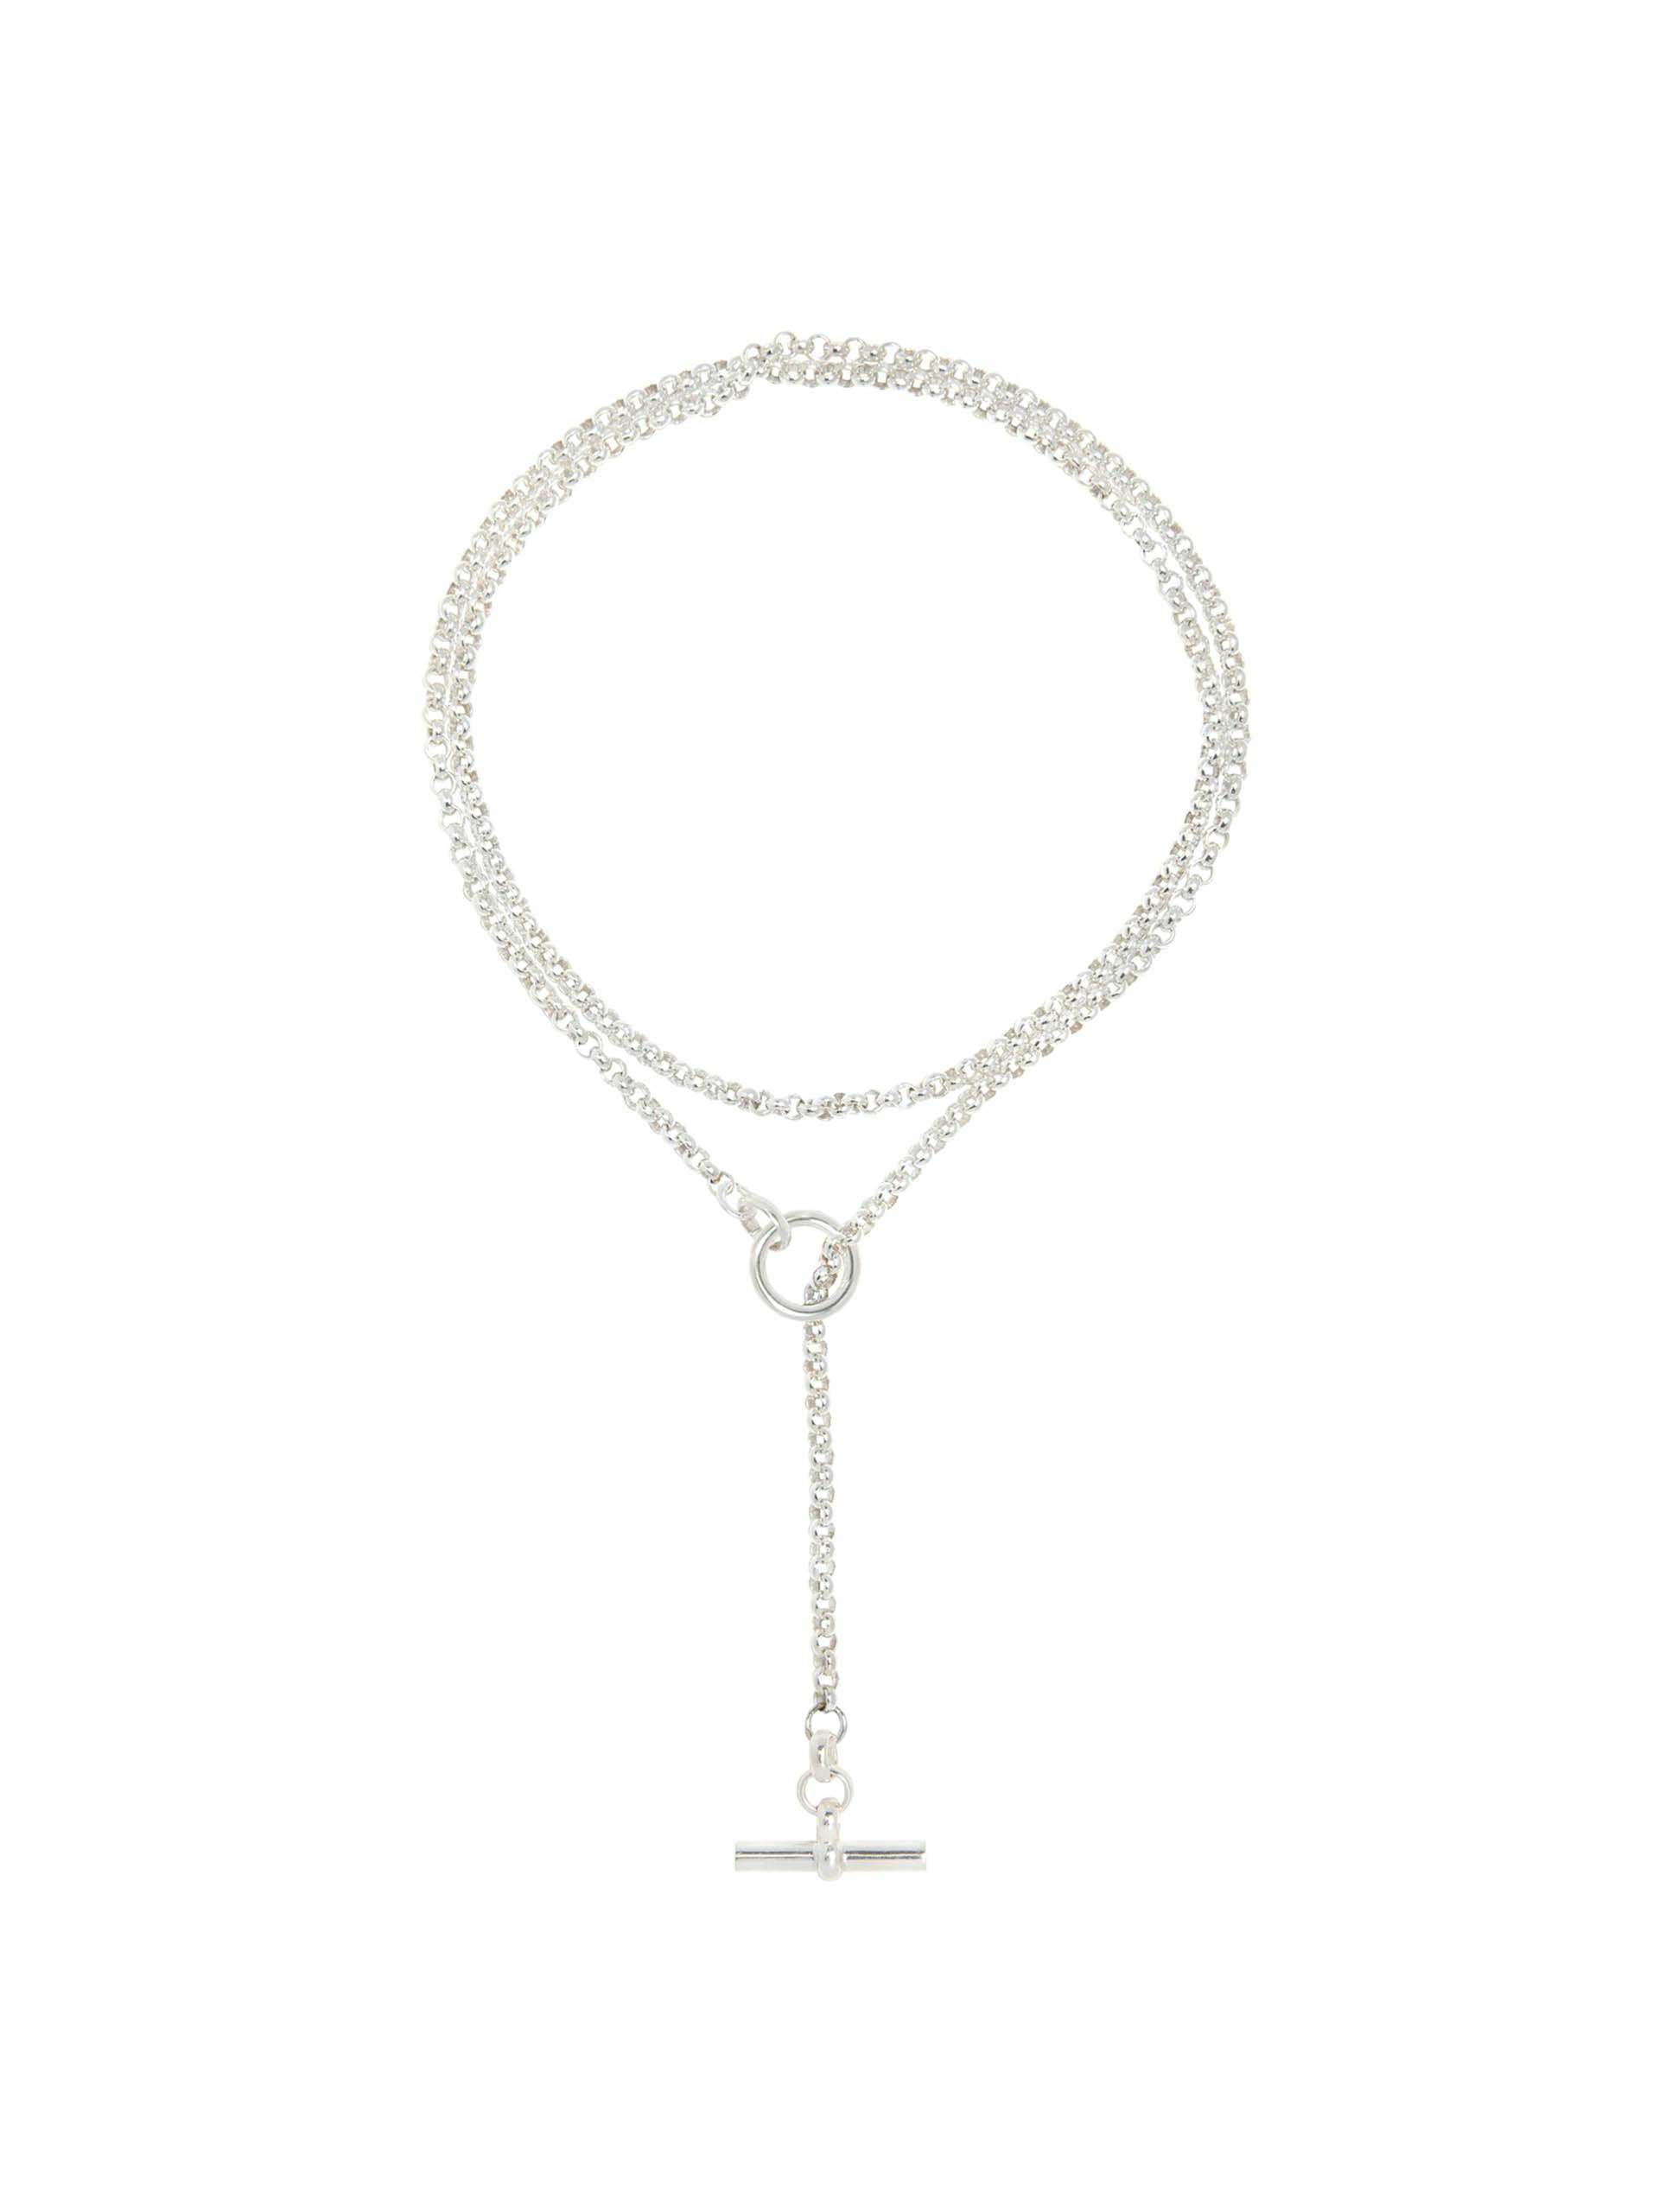 Silver Lariat necklace